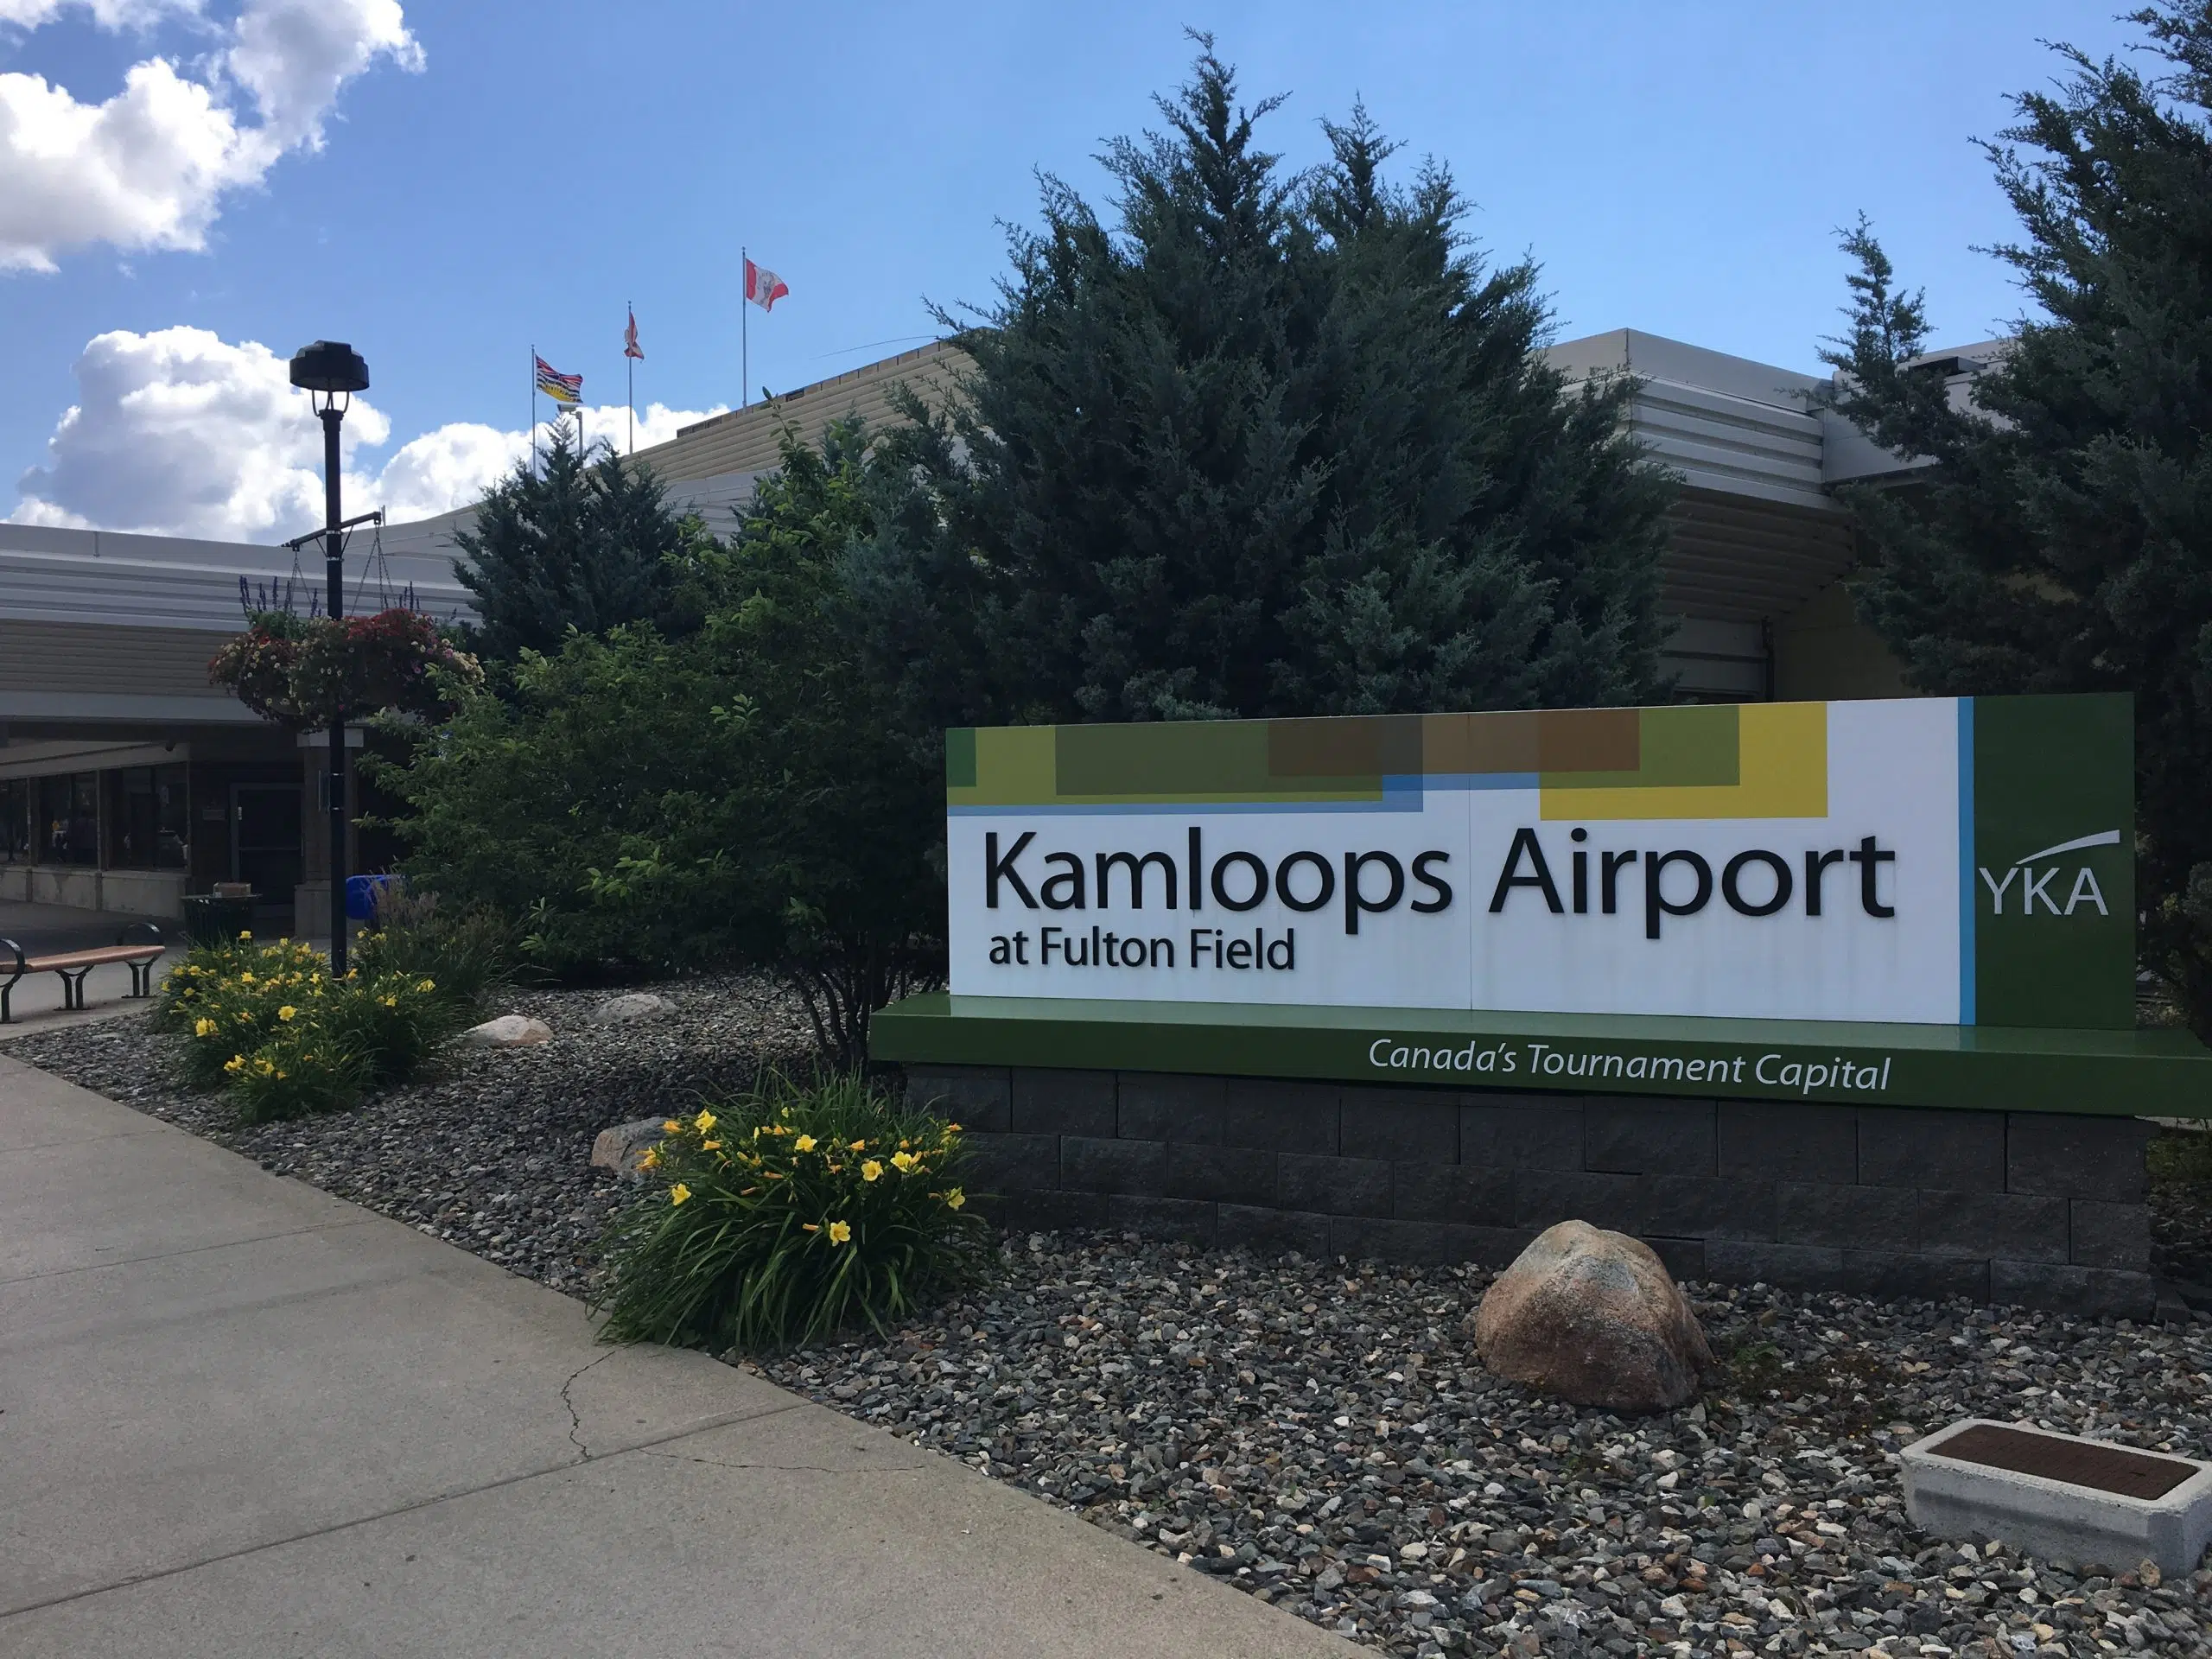 Kamloops Airport passenger numbers remain low through first half of 2021 as travel restrictions gradually ease